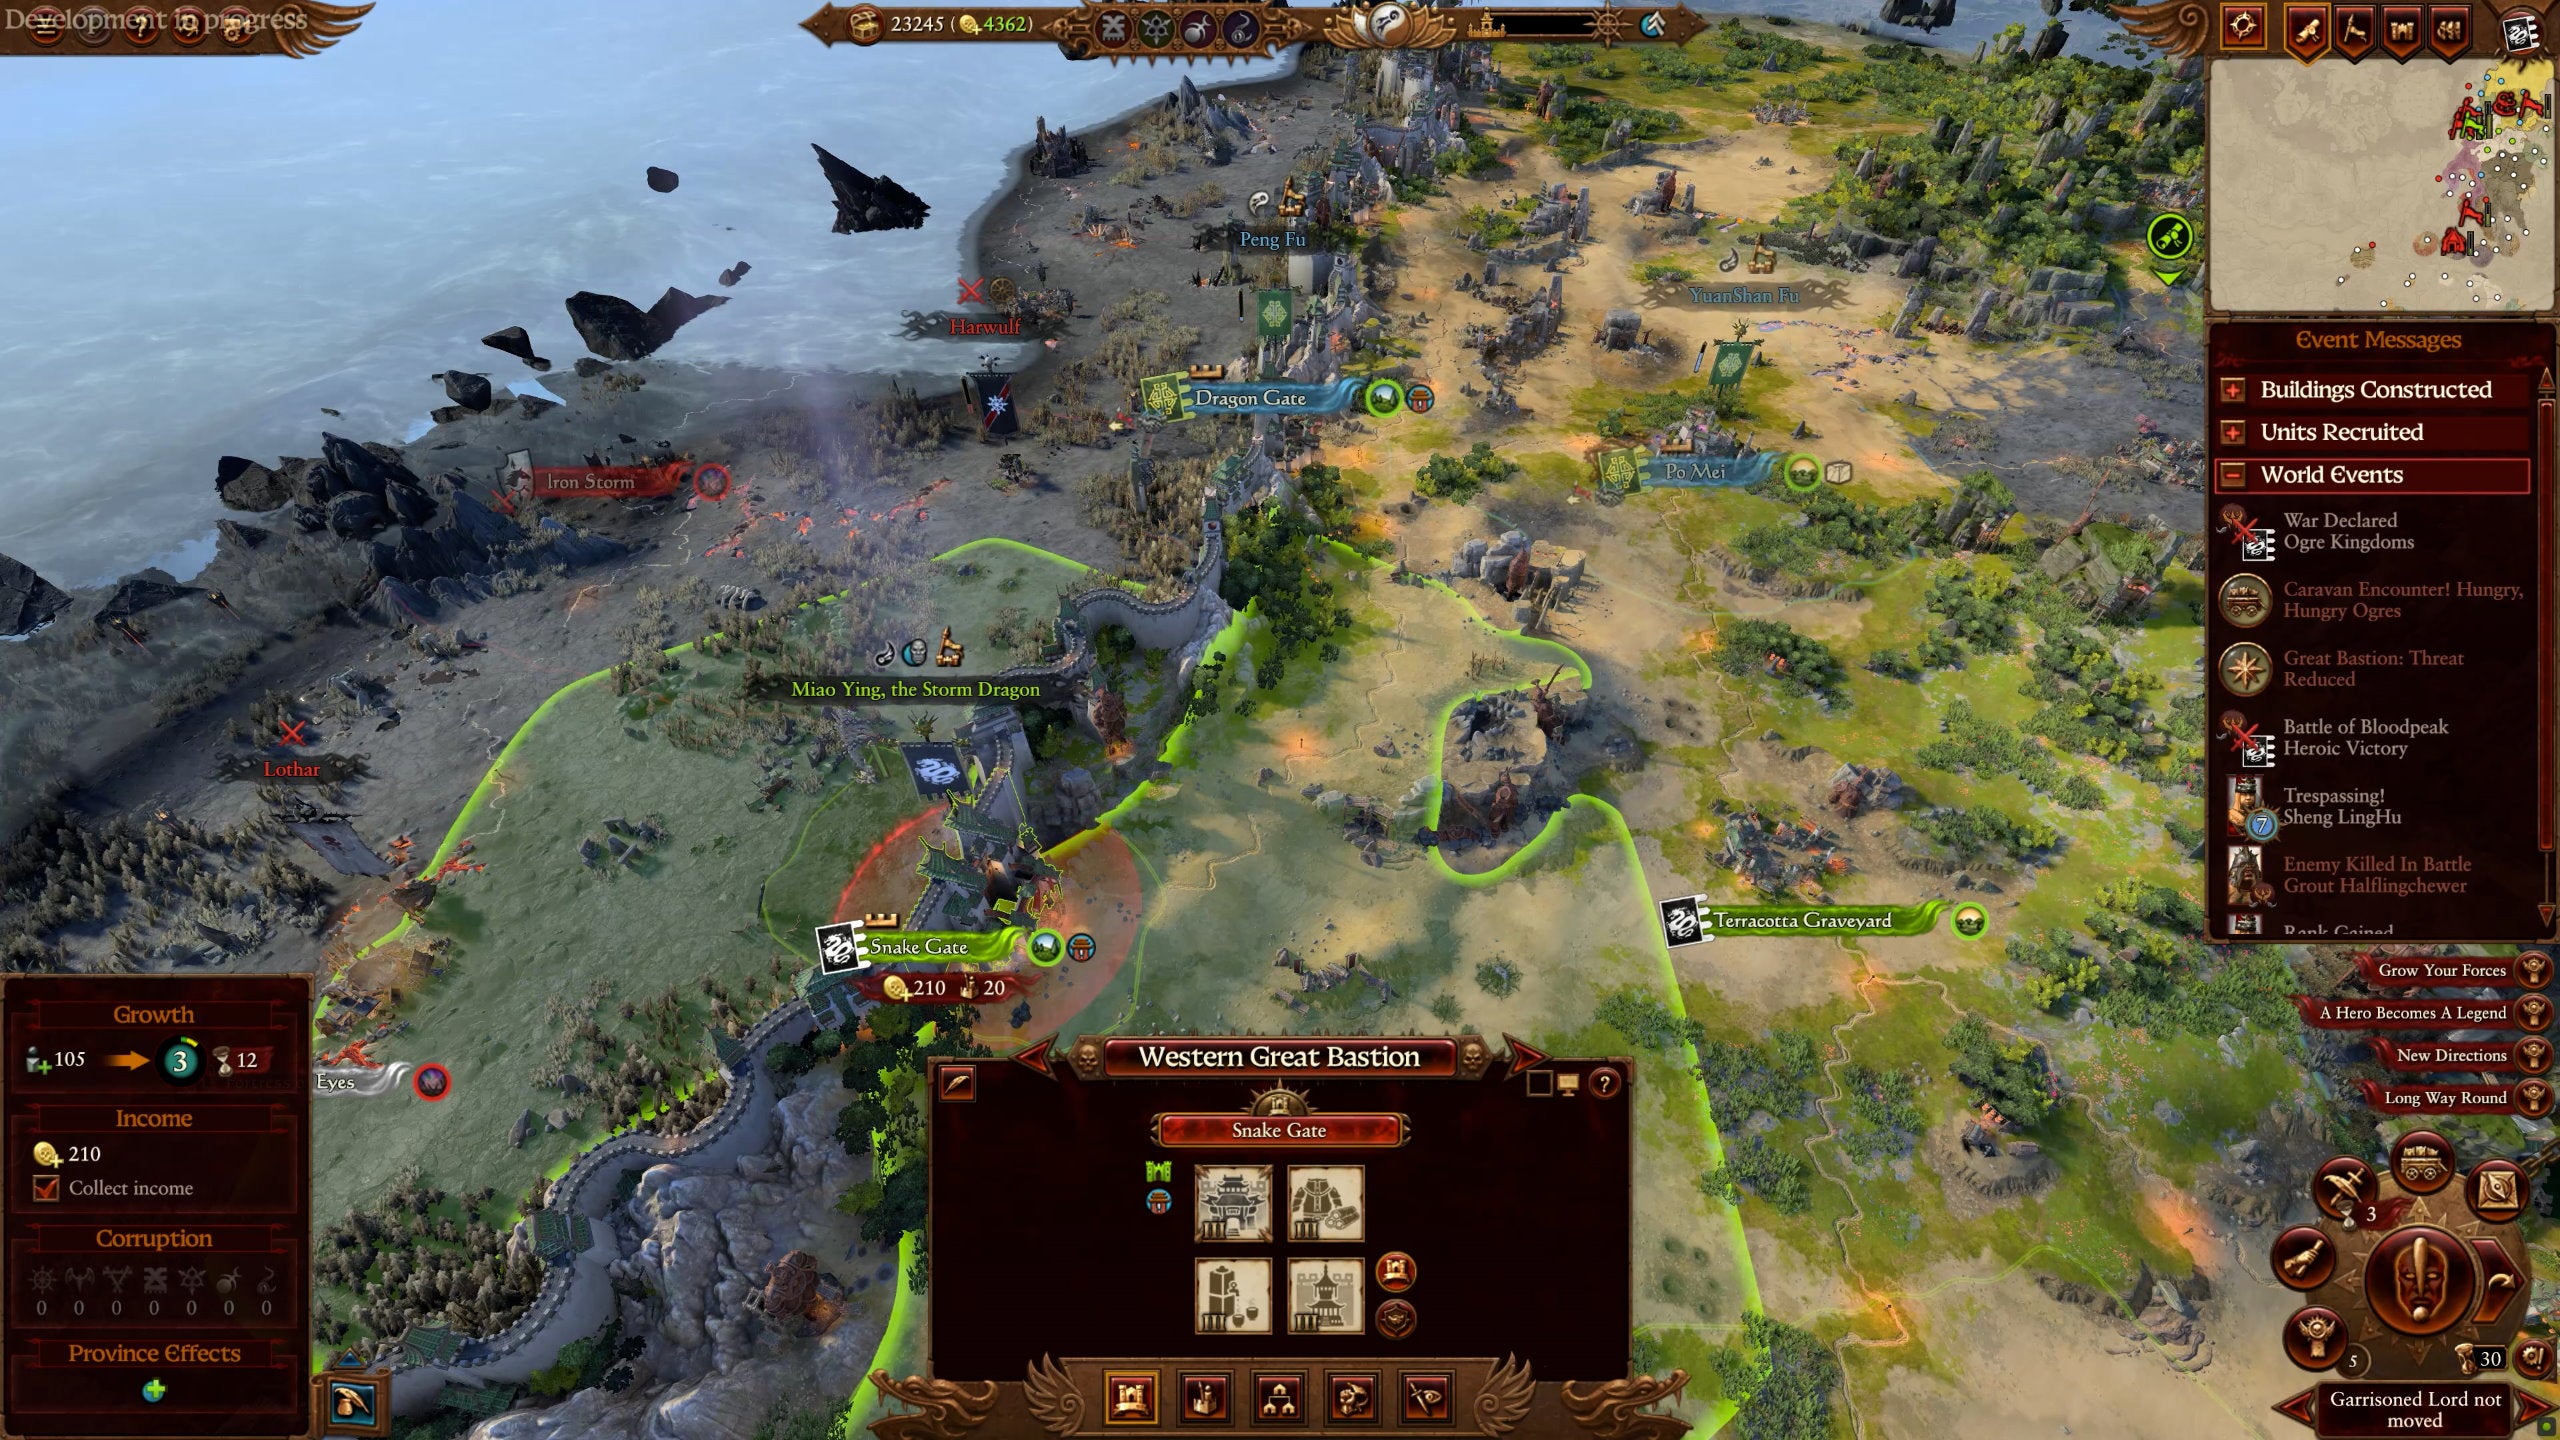 A top down view of the Western Great Bastion in Total War: Warhammer 3